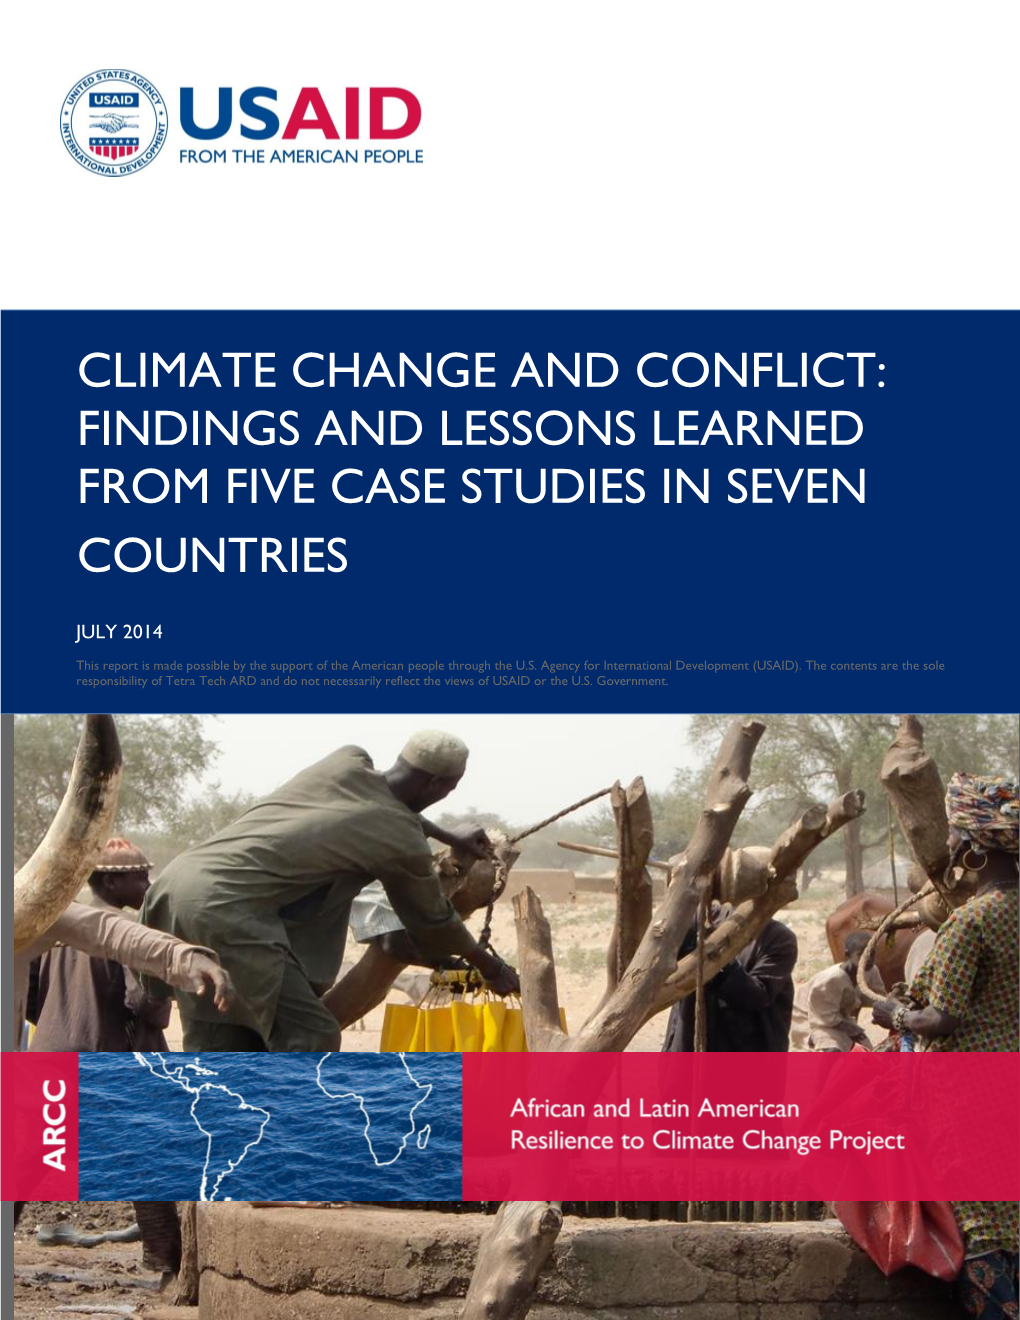 Climate Change and Conflict: Findings and Lessons Learned from Five Case Studies in Seven Countries